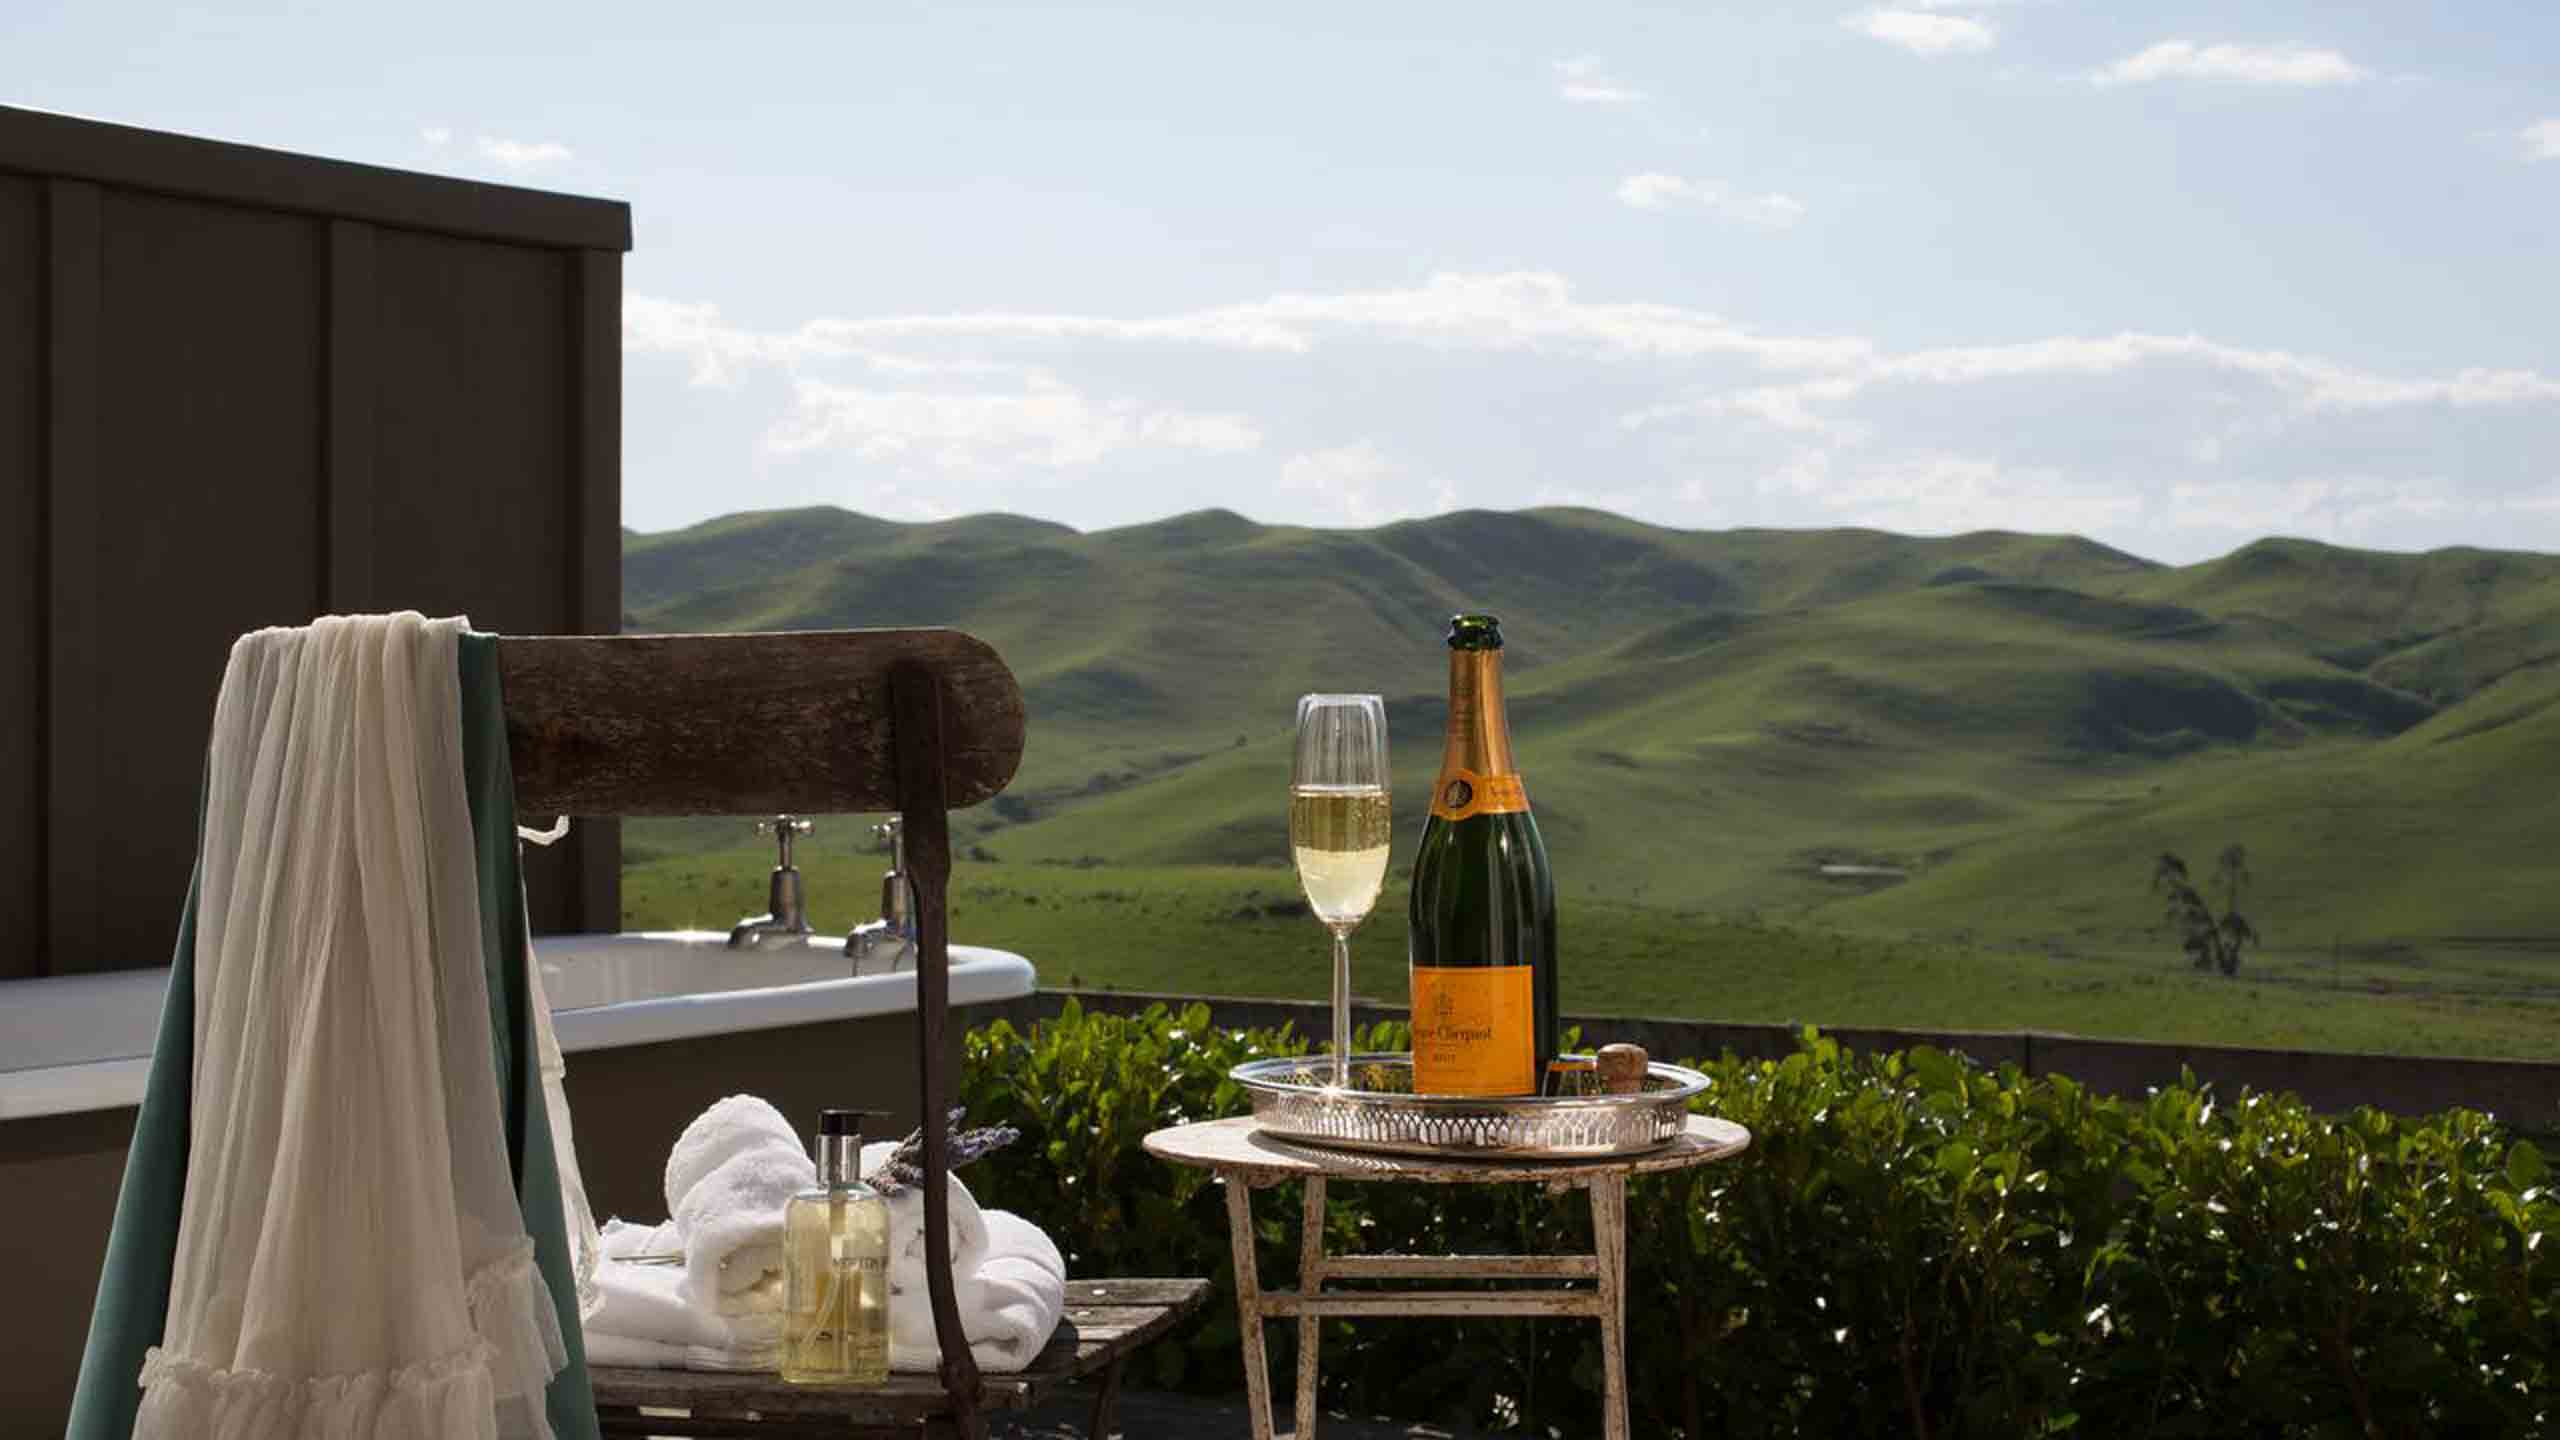 greenhill-lodge-napier-hawkes-bay-new-zealand-champagne-on-deck